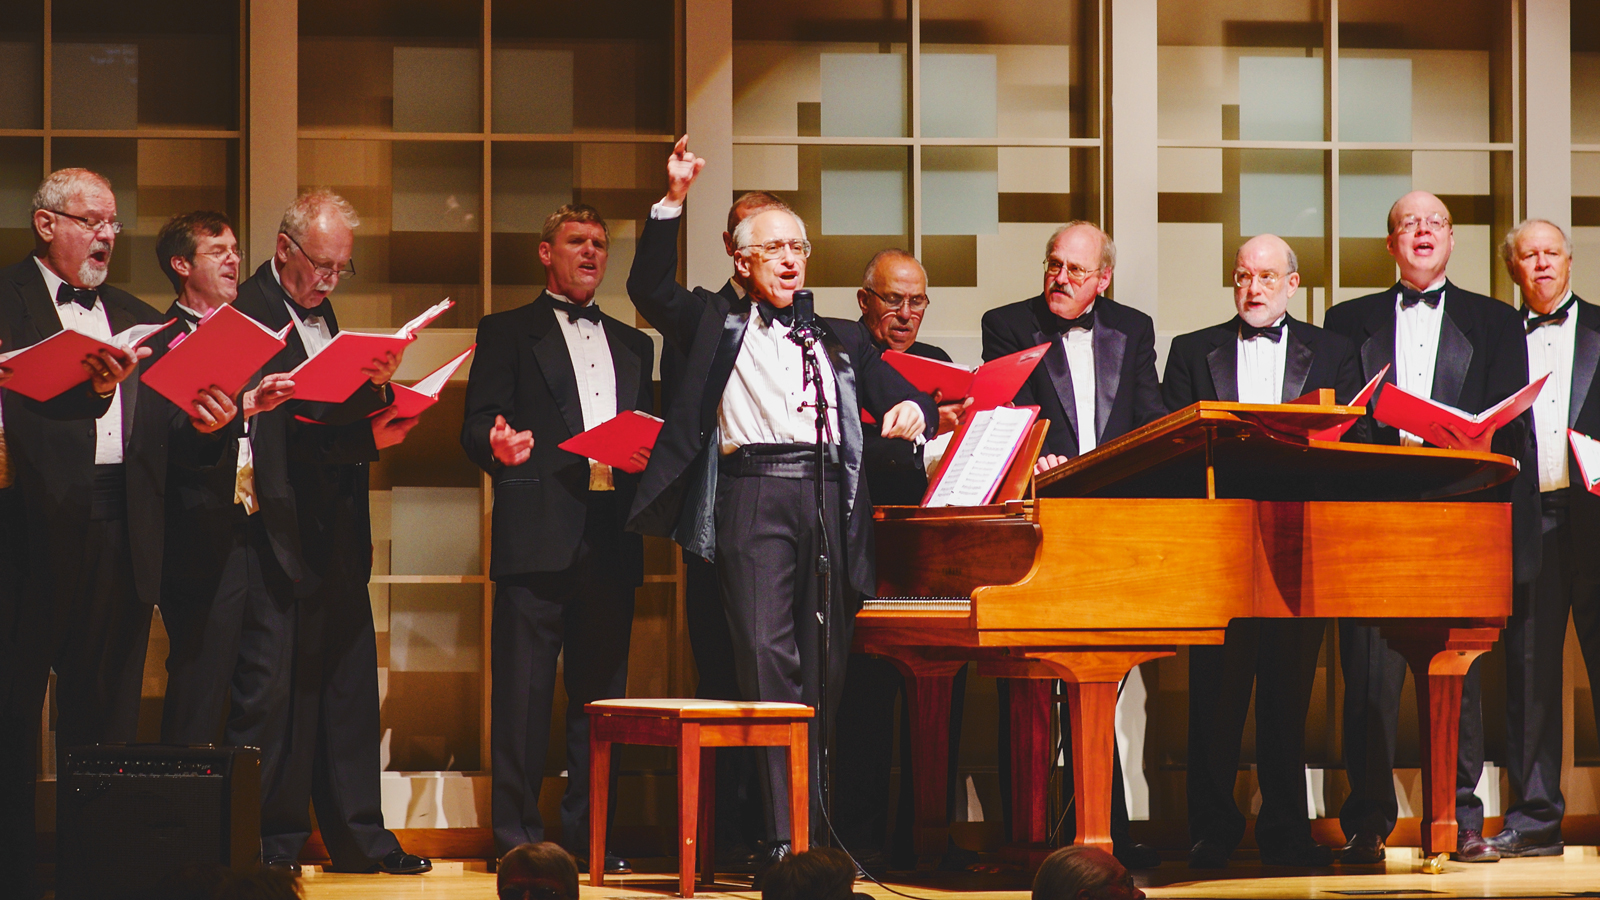 Members of the Savage Club perform in Statler Auditorium during Reunion 2014